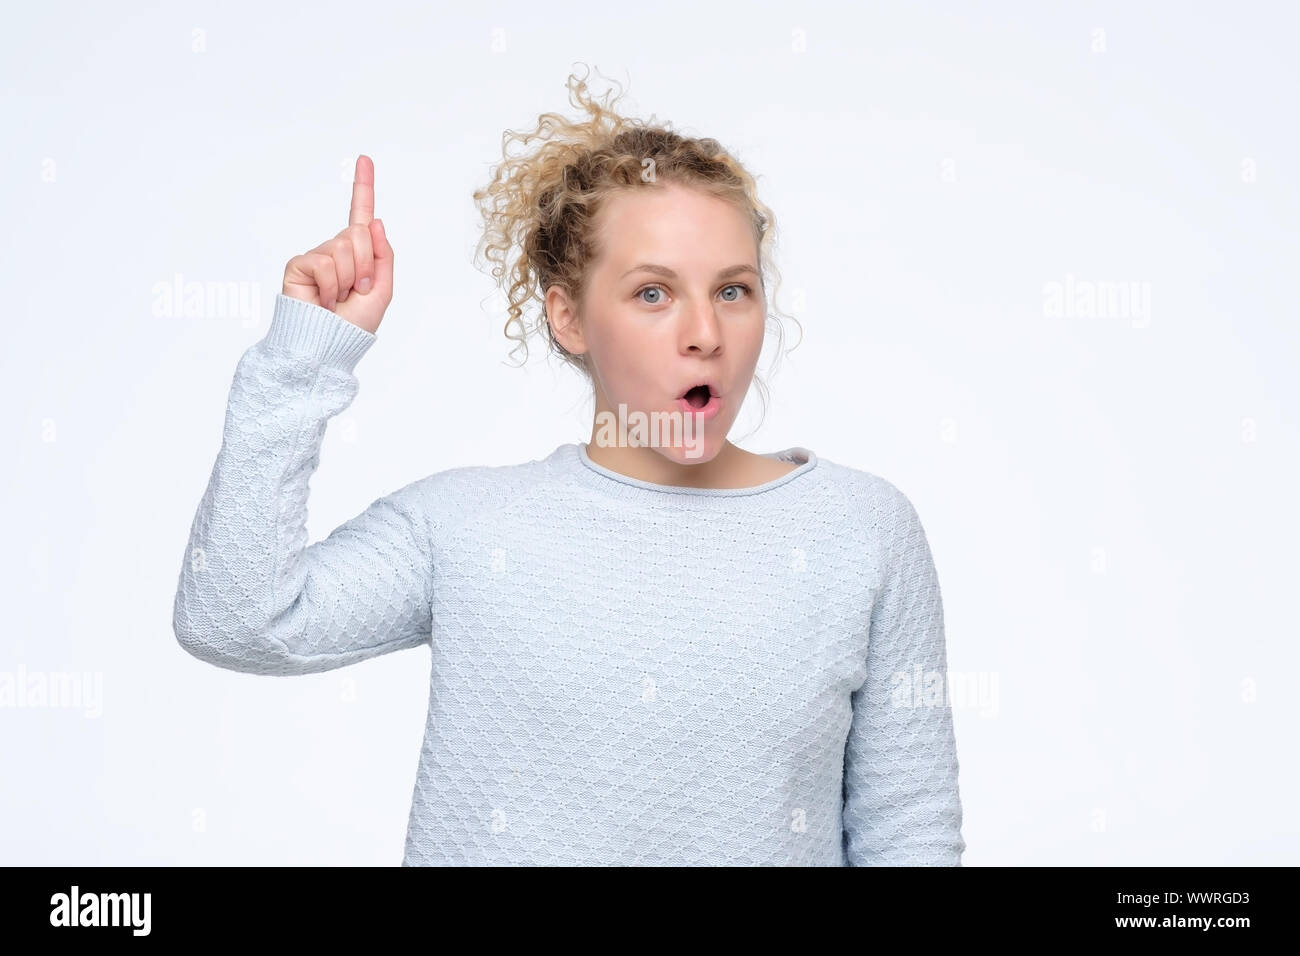 Young beautiful curly girl looking excited holding her mouth opened pointing up having idea. Studio shot. Look here it is amazing concept Stock Photo